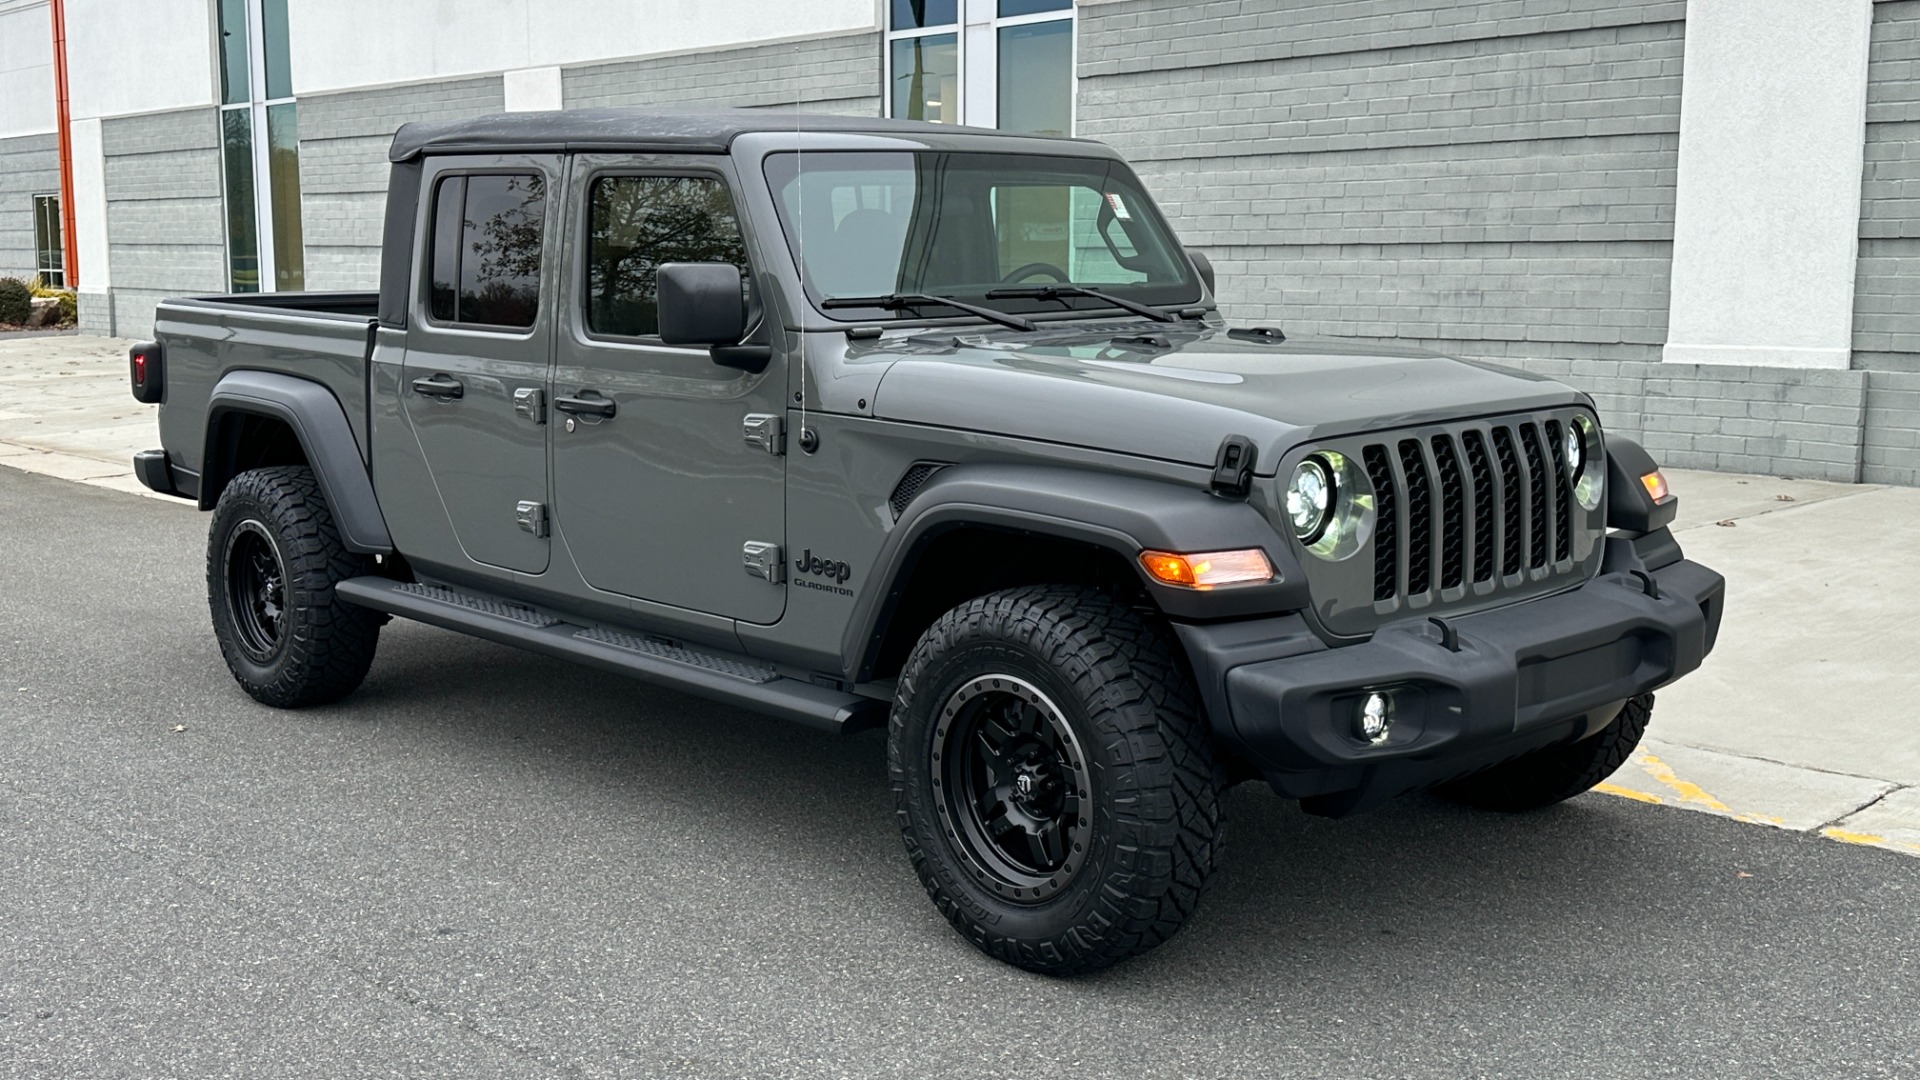 Used 2020 Jeep Gladiator Sport S / FUEL WHEELS / LED LIGHTS / S PACKAGE / BLACKOUT TRIM for sale $40,995 at Formula Imports in Charlotte NC 28227 8